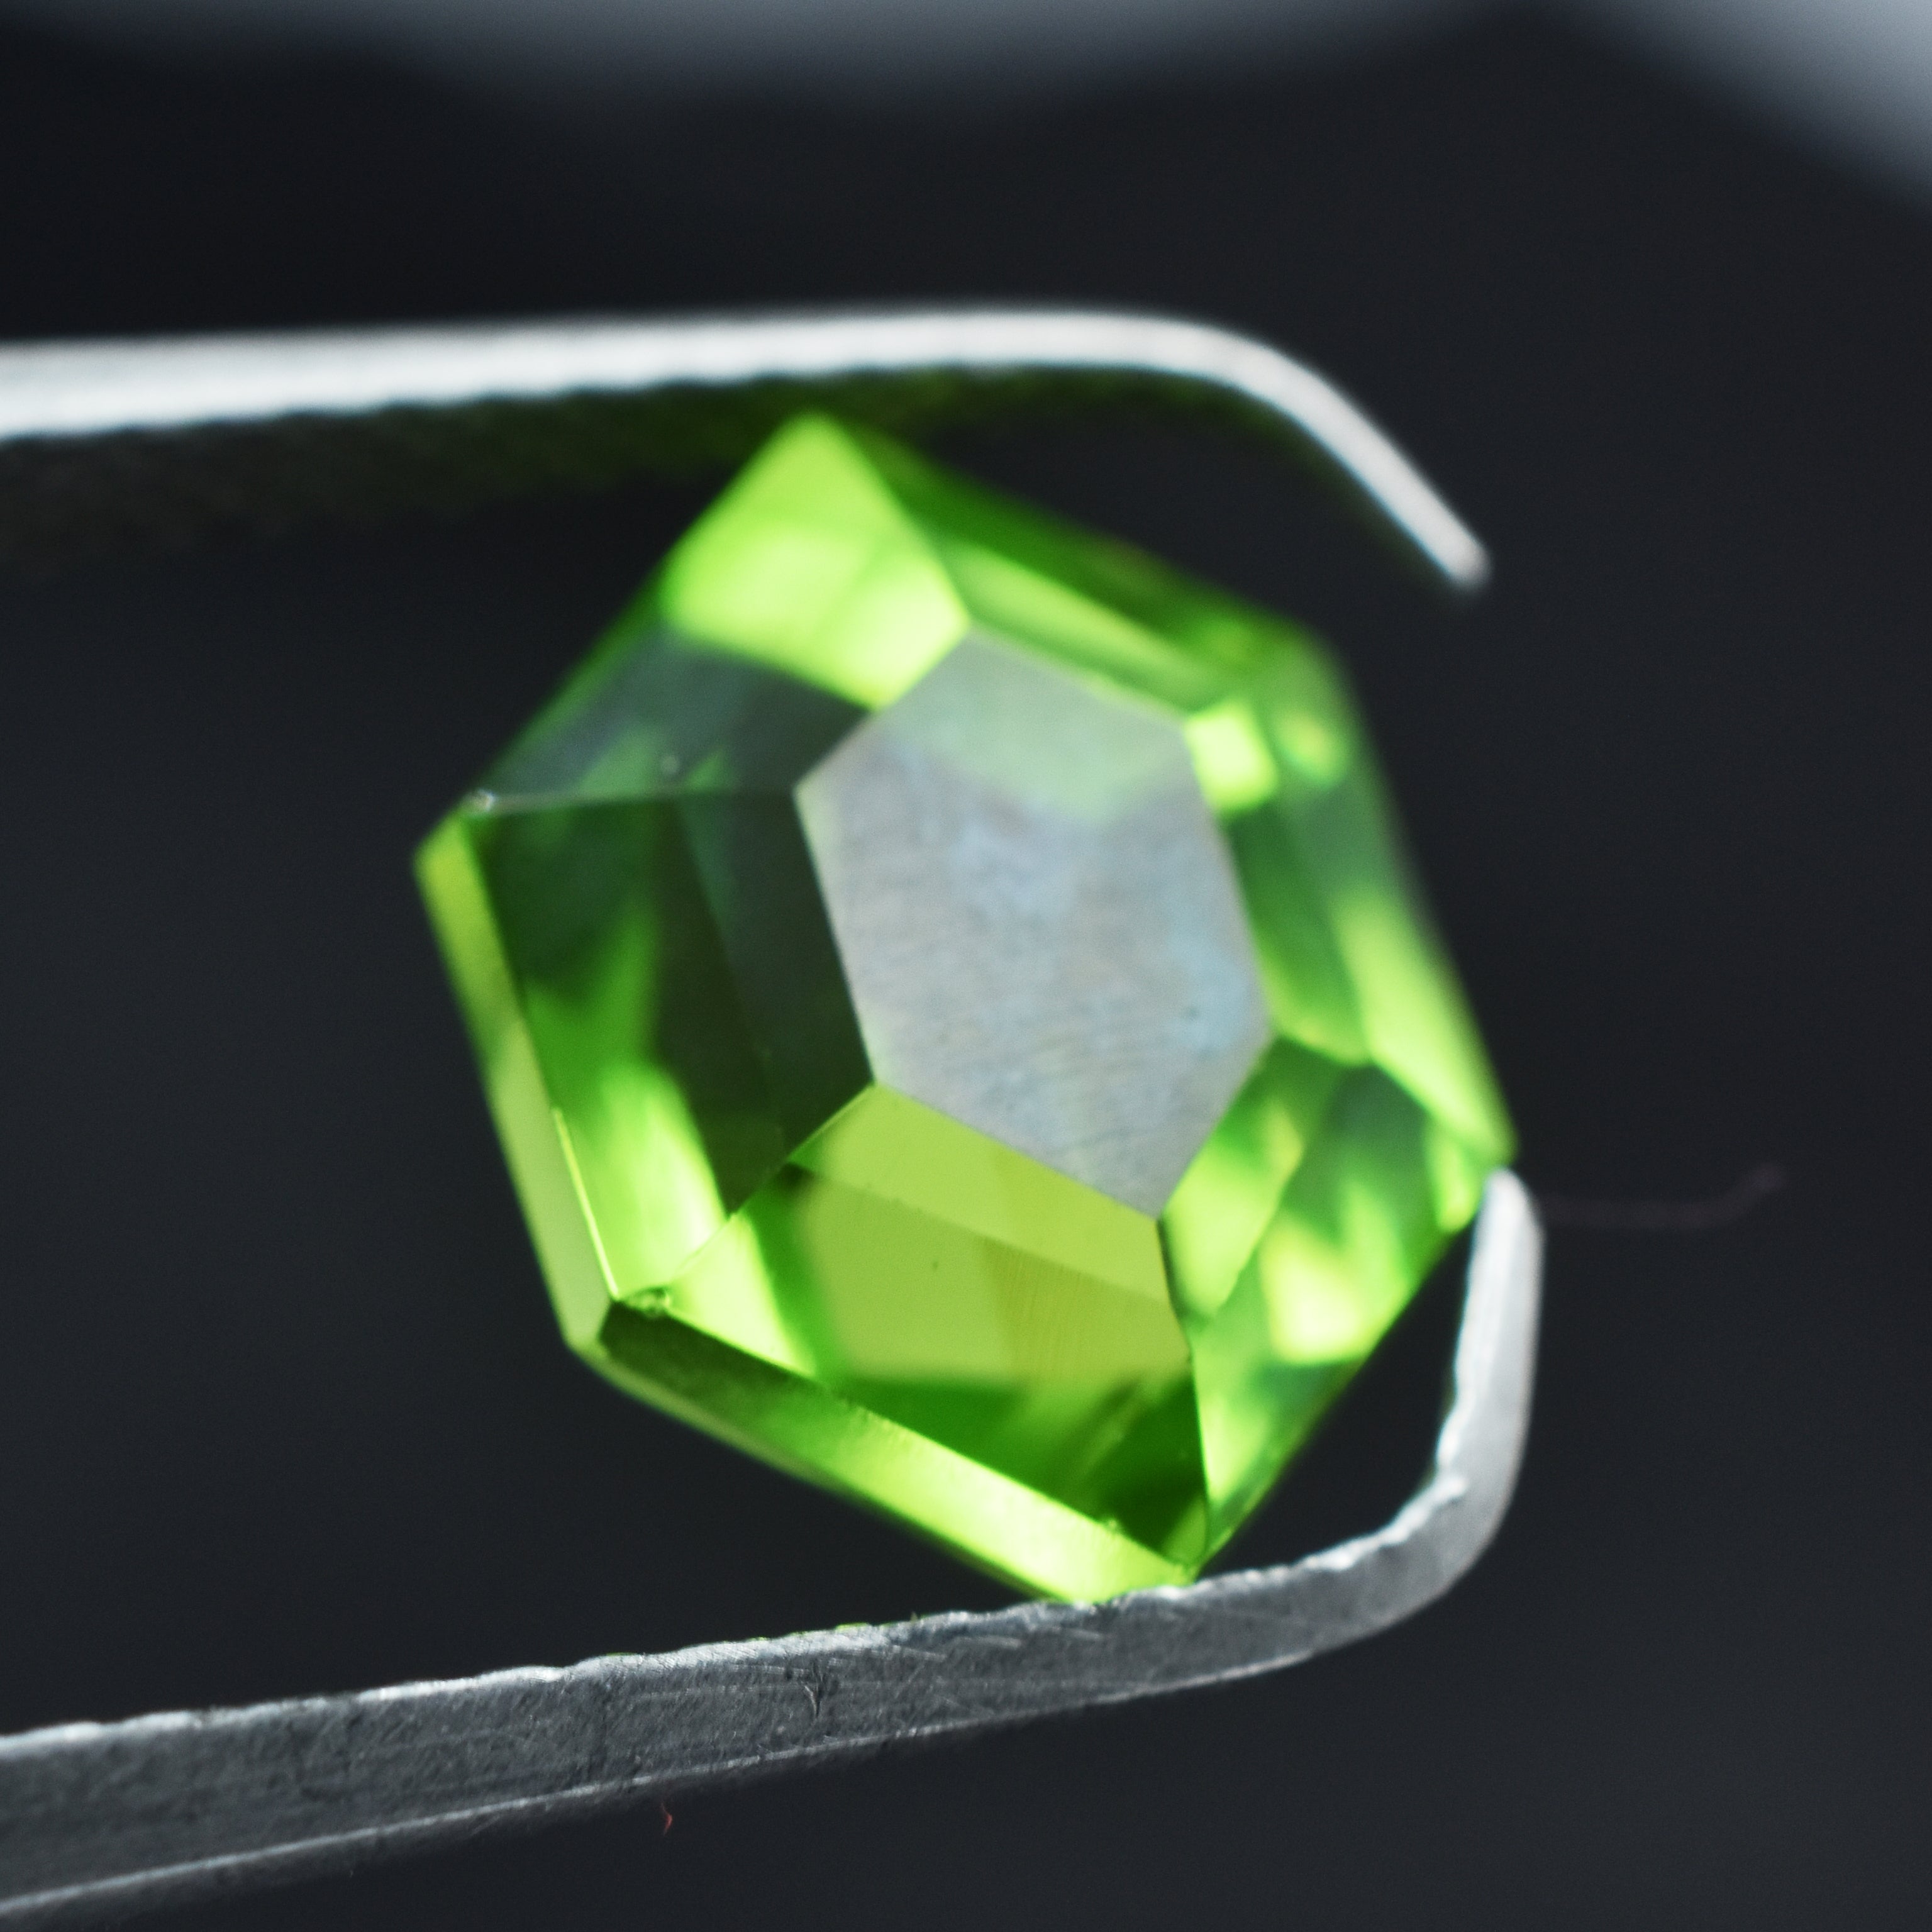 Beautiful Ring Size Gemstone !!! Natural Peridot 9.65 Carat Fancy Cut Green Peridot Certified Loose Gemstone , Best For Protection & Overall-Well Being , Gift For Her / Him